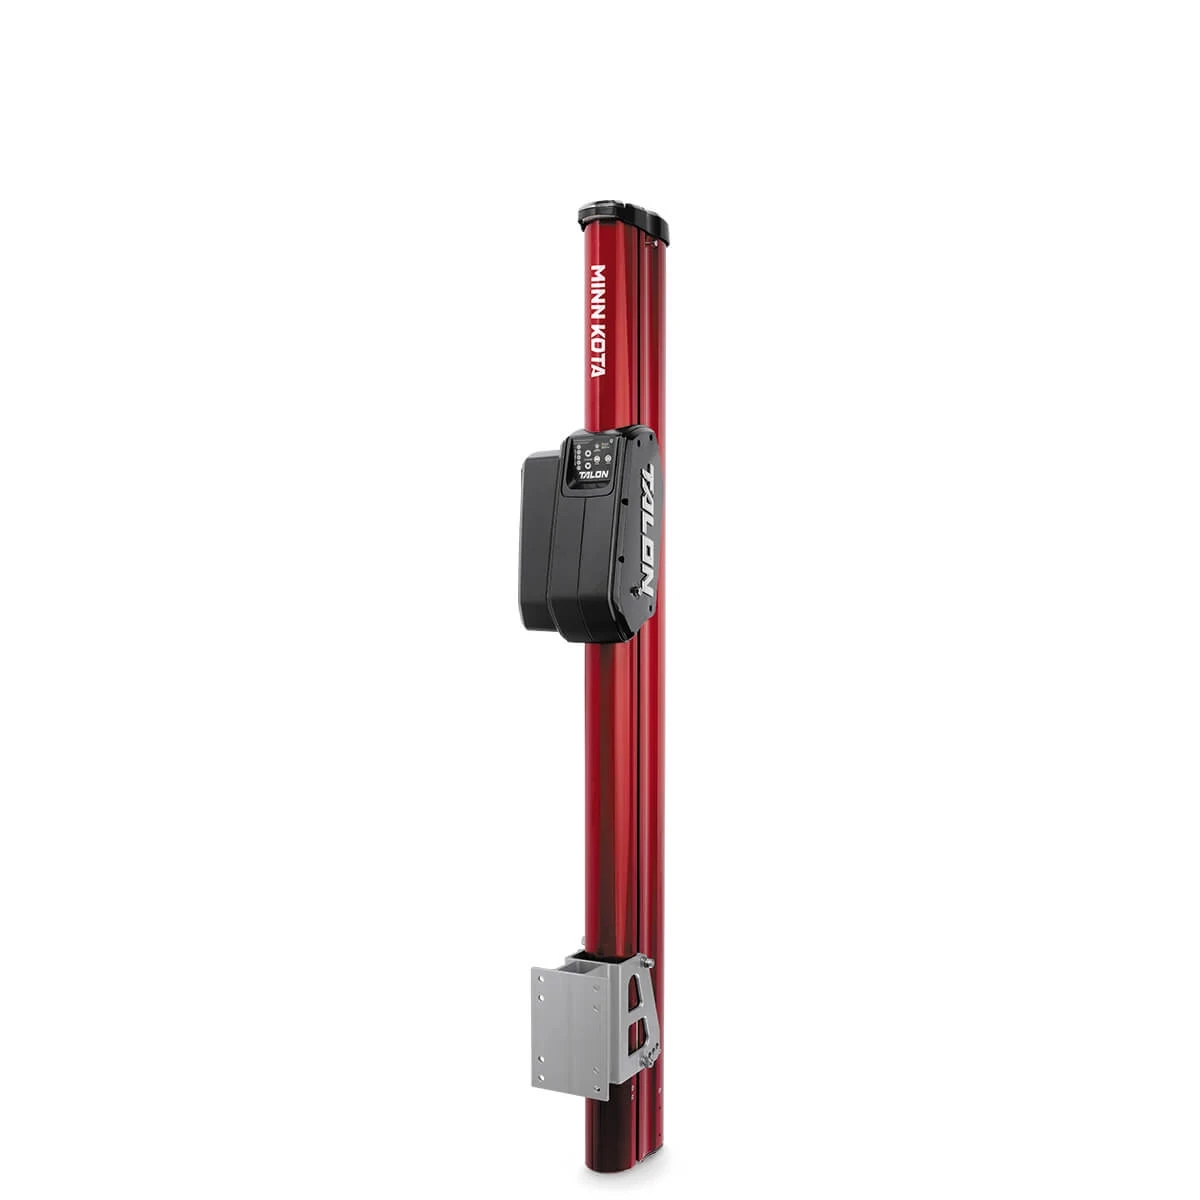 12-foot red Talon shallow water anchor with black control box